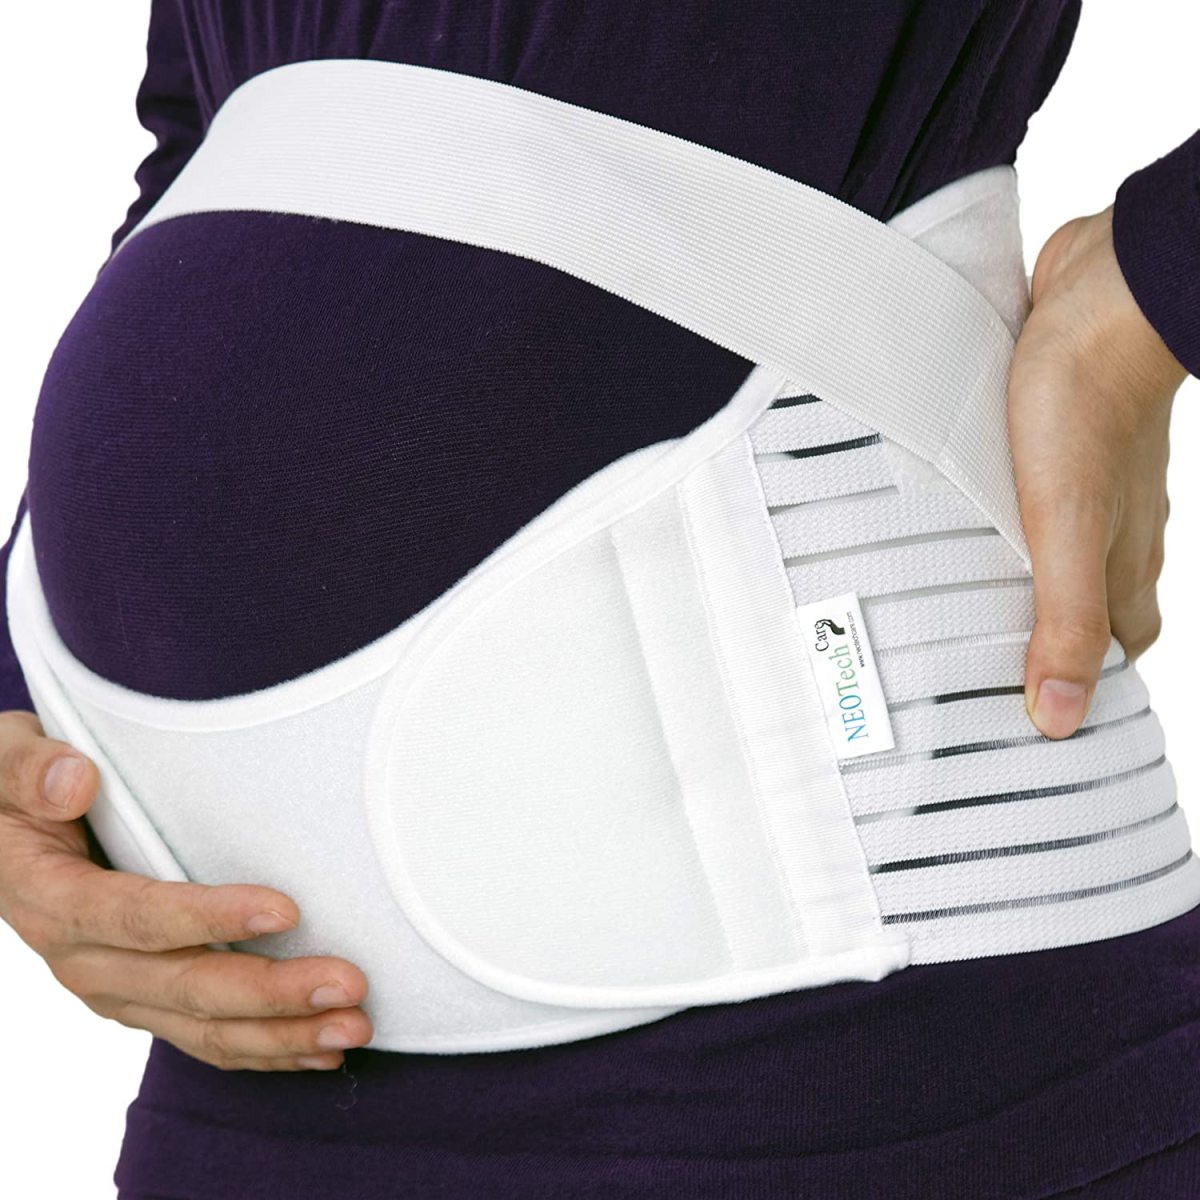 Voted most comfortable maternity support belt by moms-to-be.